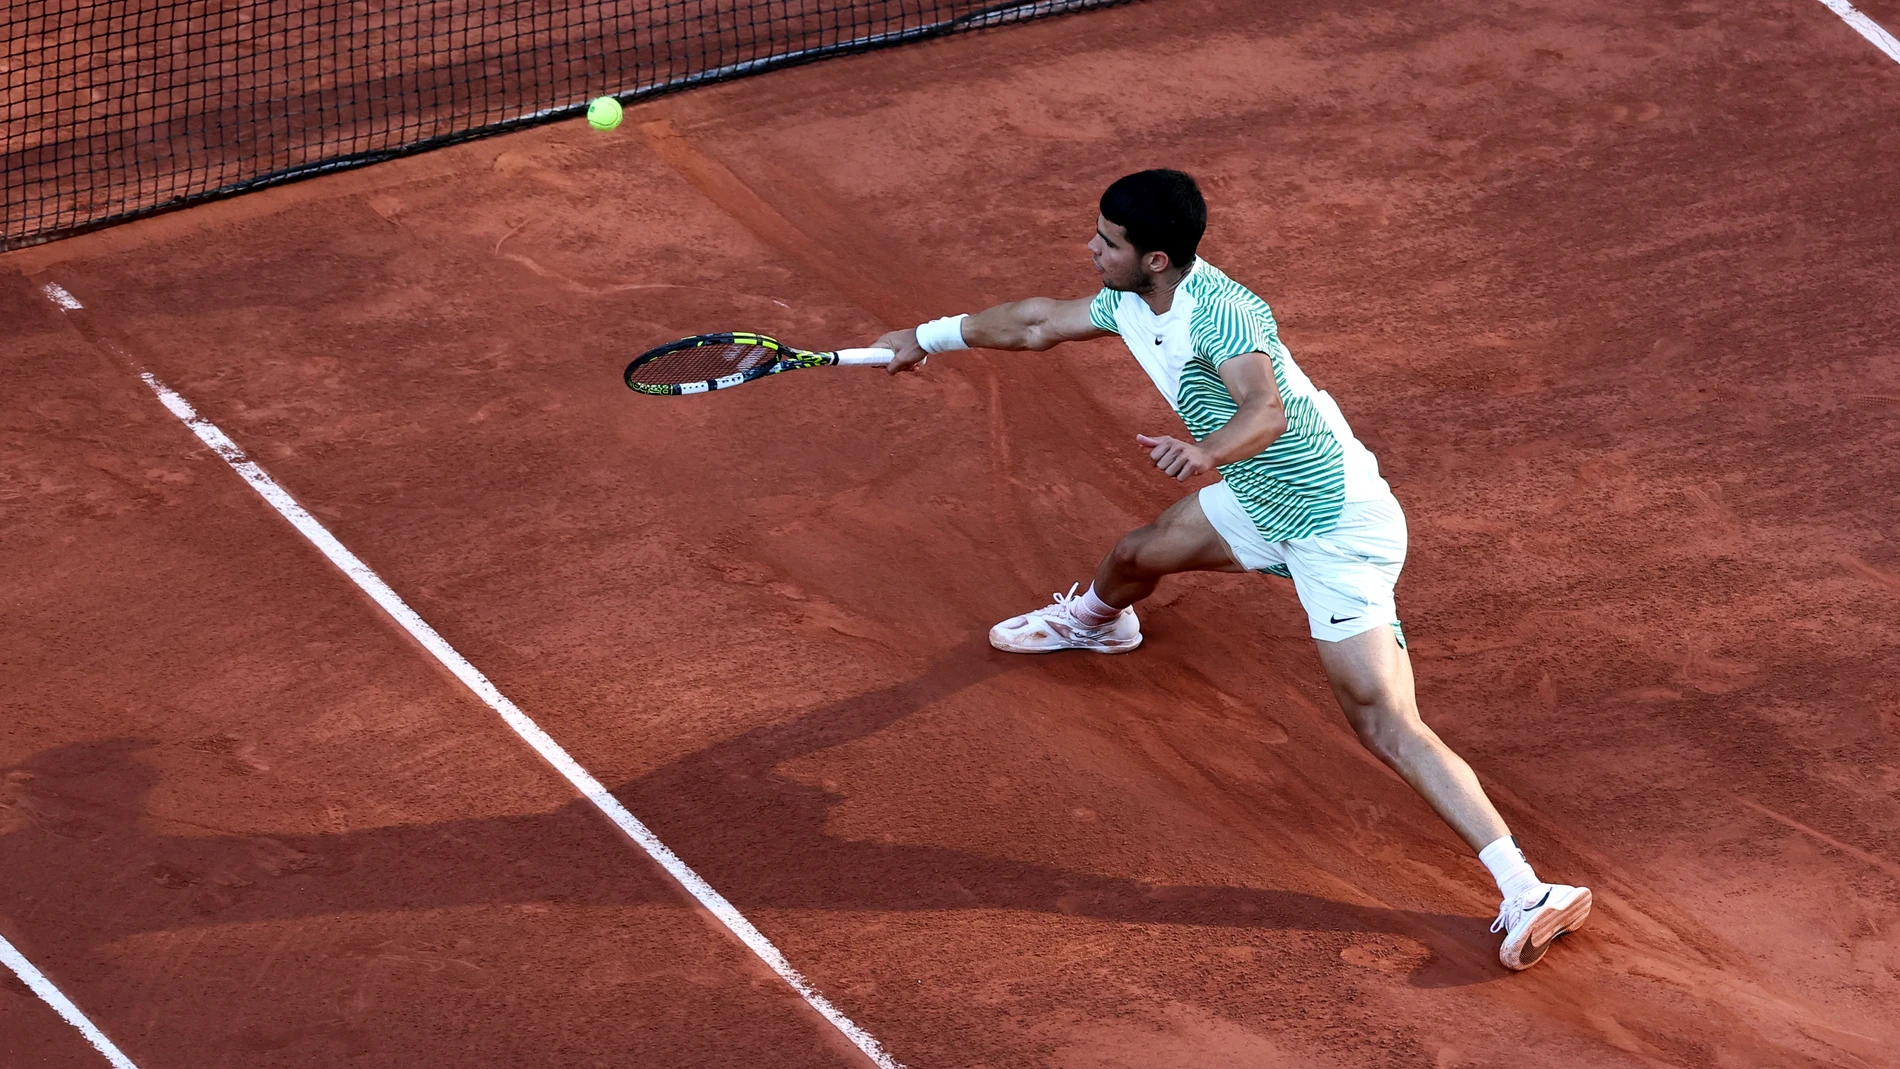 Paris (France), 04/06/2023.- Carlos Alcaraz of Spain plays Lorenzo Musetti of Italy in their Men's Singles fourth round match during the French Open Grand Slam tennis tournament at Roland Garros in Paris, France, 04 June 2023. (Tenis, Abierto, Abierto, Francia, Italia, España) EFE/EPA/MOHAMMED BADRA 